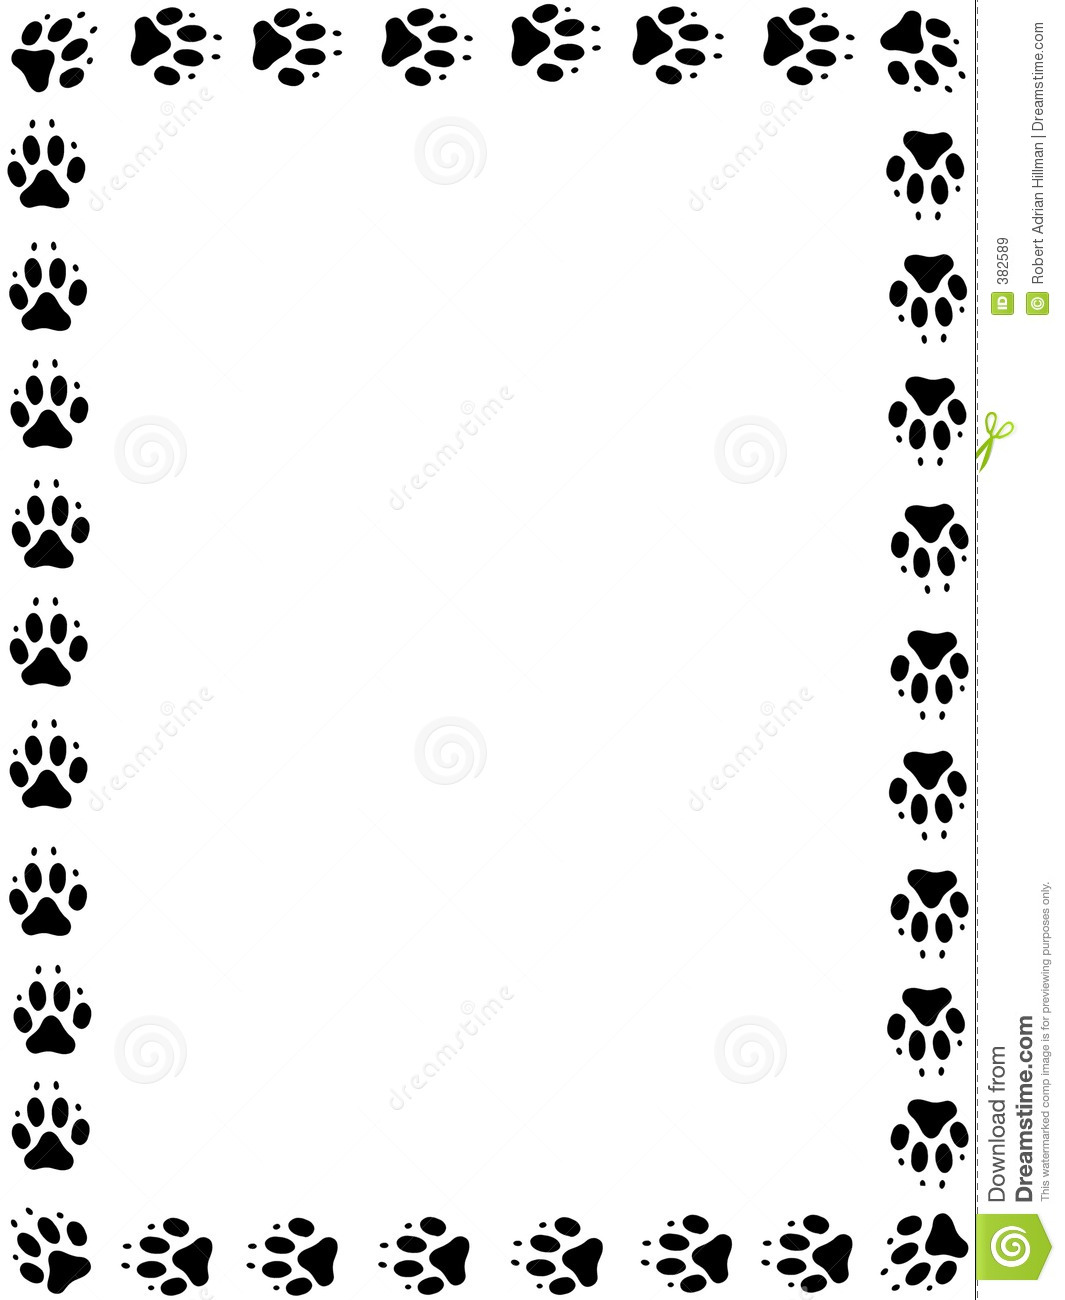 Best Photos of Dog Paw Print Border Template